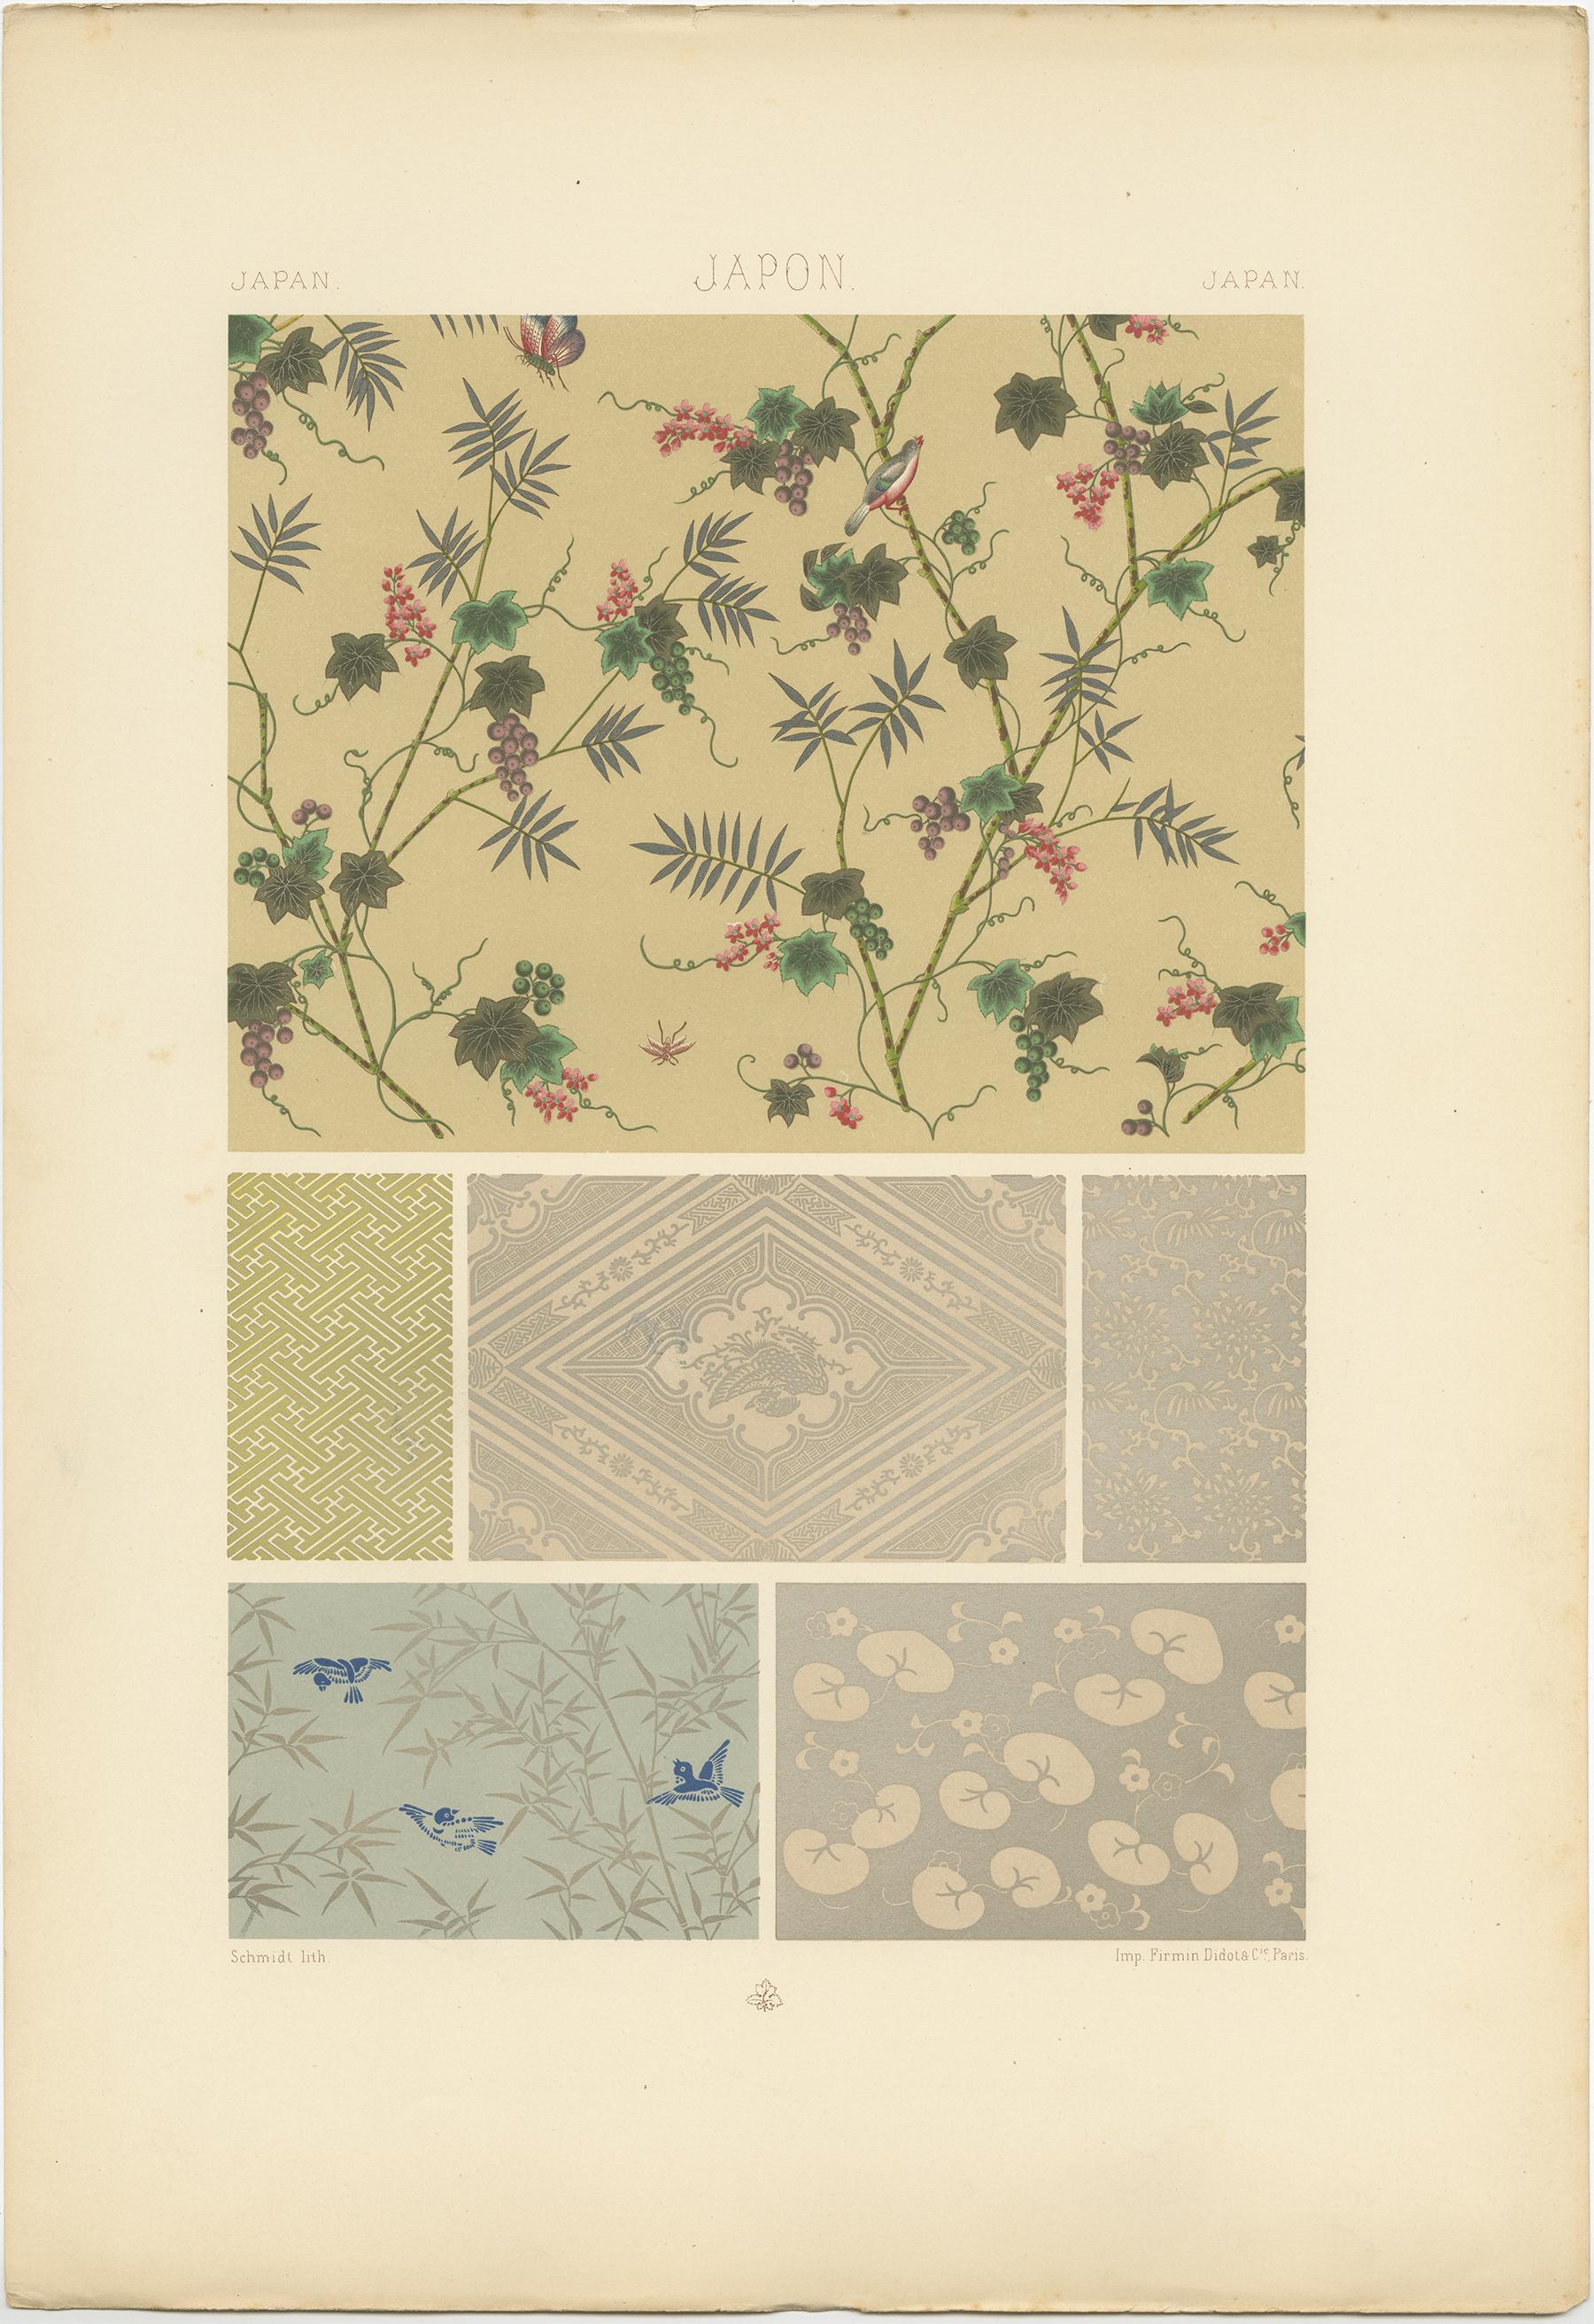 Antique print titled 'Japanese - Japonais - Japonesisch'. Chromolithograph of Japanese printed wallpapers ornaments. This print originates from 'l'Ornement Polychrome' by Auguste Racinet. Published circa 1890.